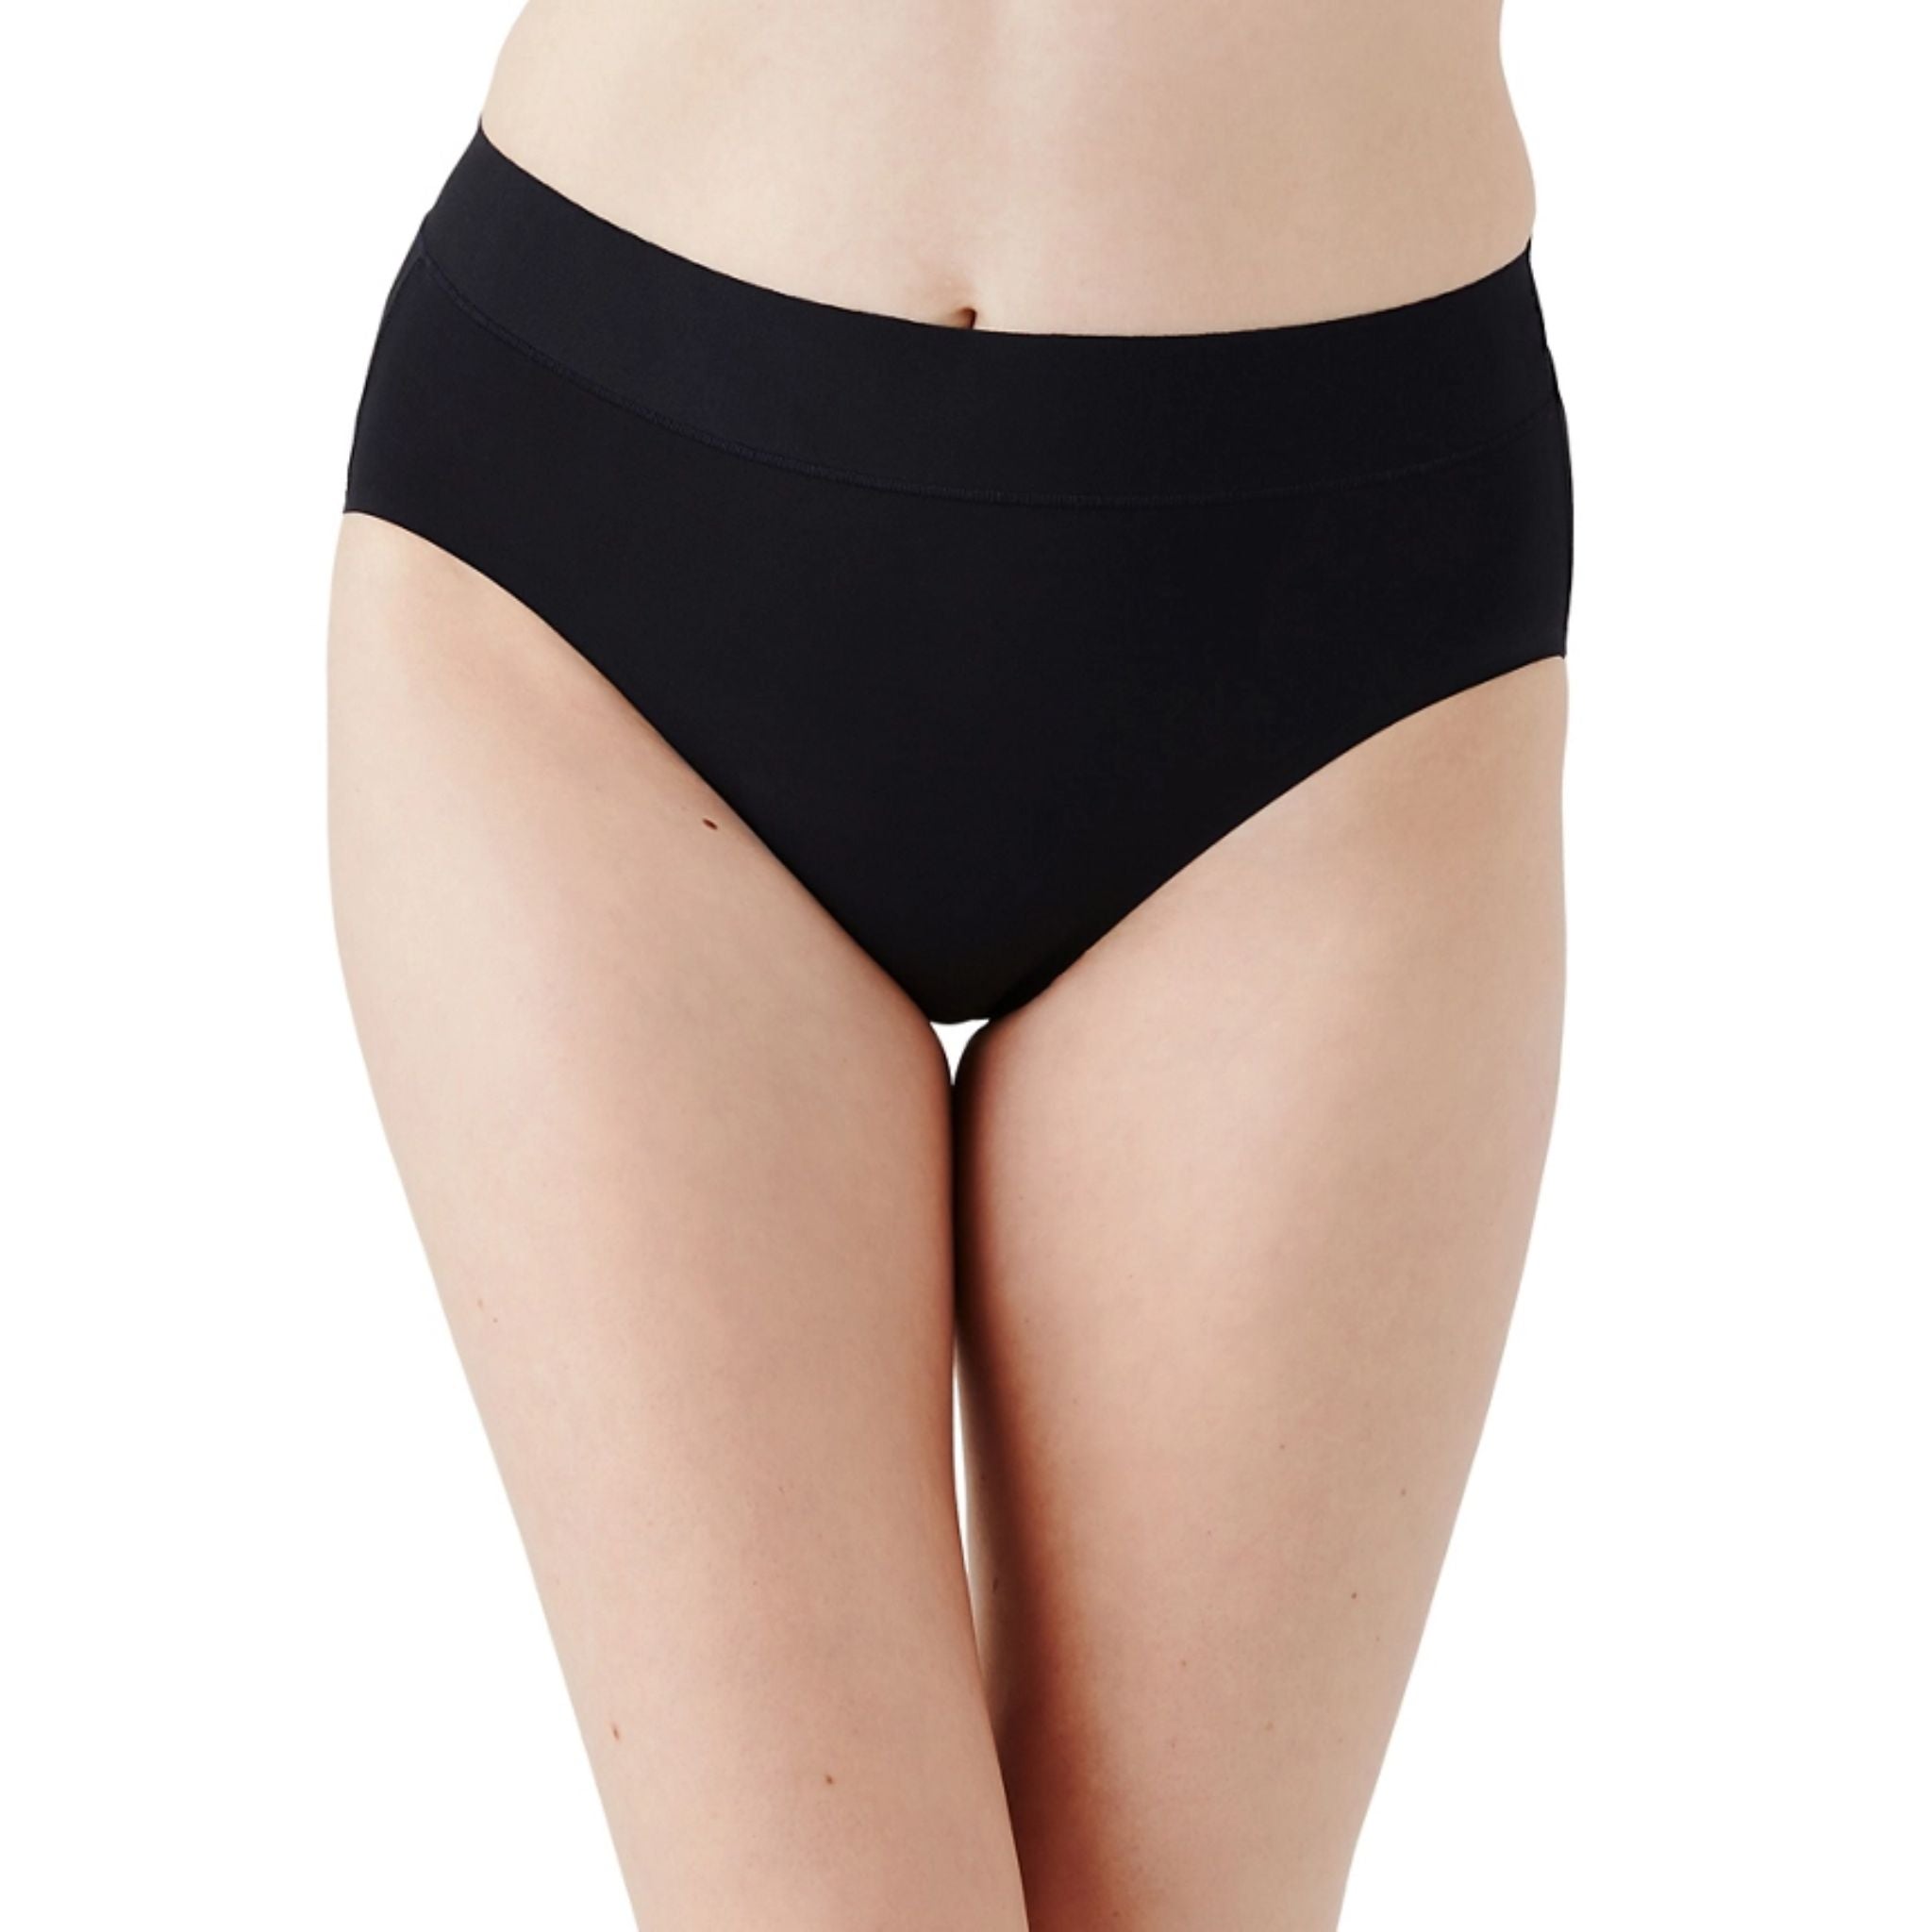 Uncomplicated and oh-so comfy, this easy-to-wear panty has an elastic-free waistband that won't pinch or dig and virtually vanishes under your clothes, making it the perfect start to any outfit.  Full coverage hi-cut Wide, elastic-free waistband won't pinch or dig and provides a smooth look under clothes Bonded leg openings eliminate panty lines Cotton gusset Fabric content: Body: 79% Nylon/21% Spandex, Crotch Lining: 100% Cotton